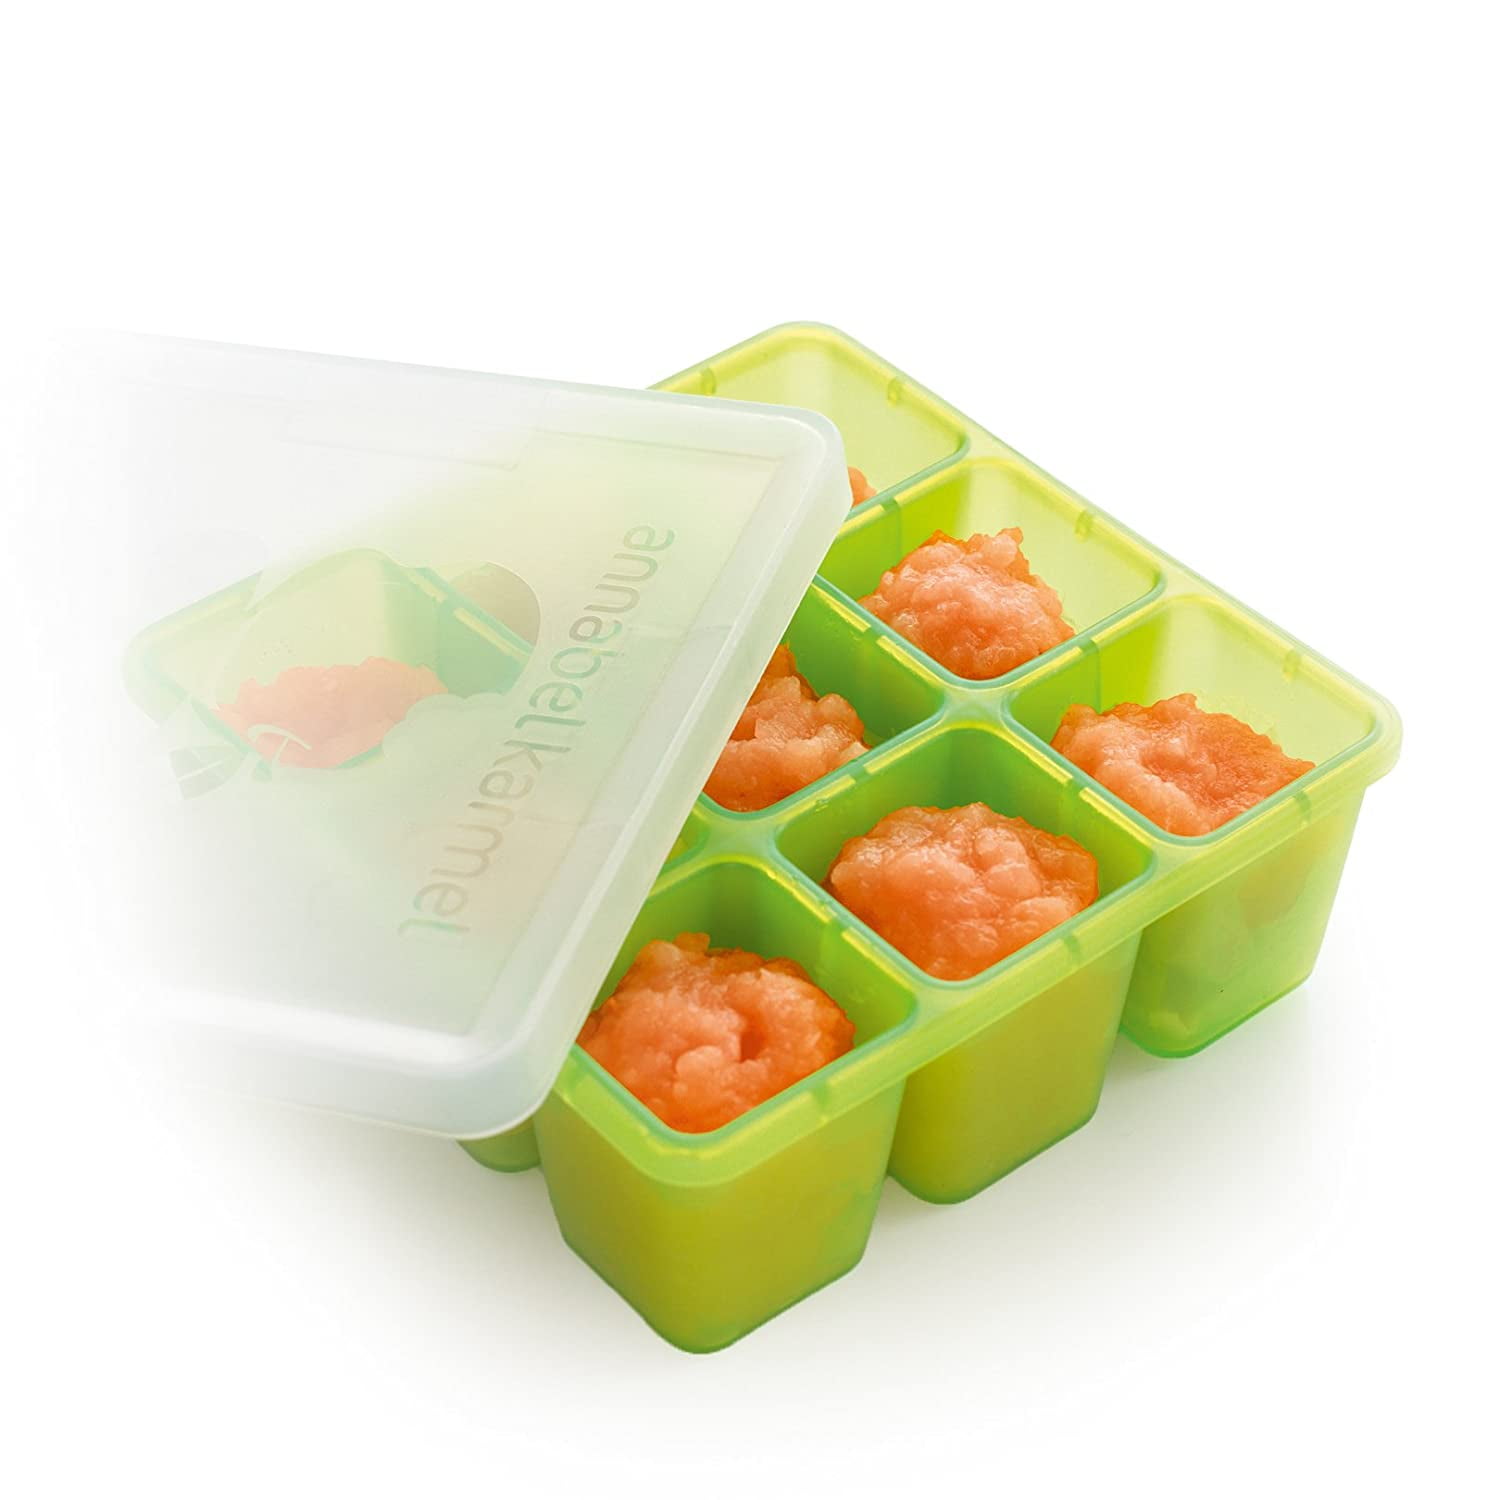 Hoolerry 4 Pcs Silicone Baby Food Freezer Tray with Clip on Lid